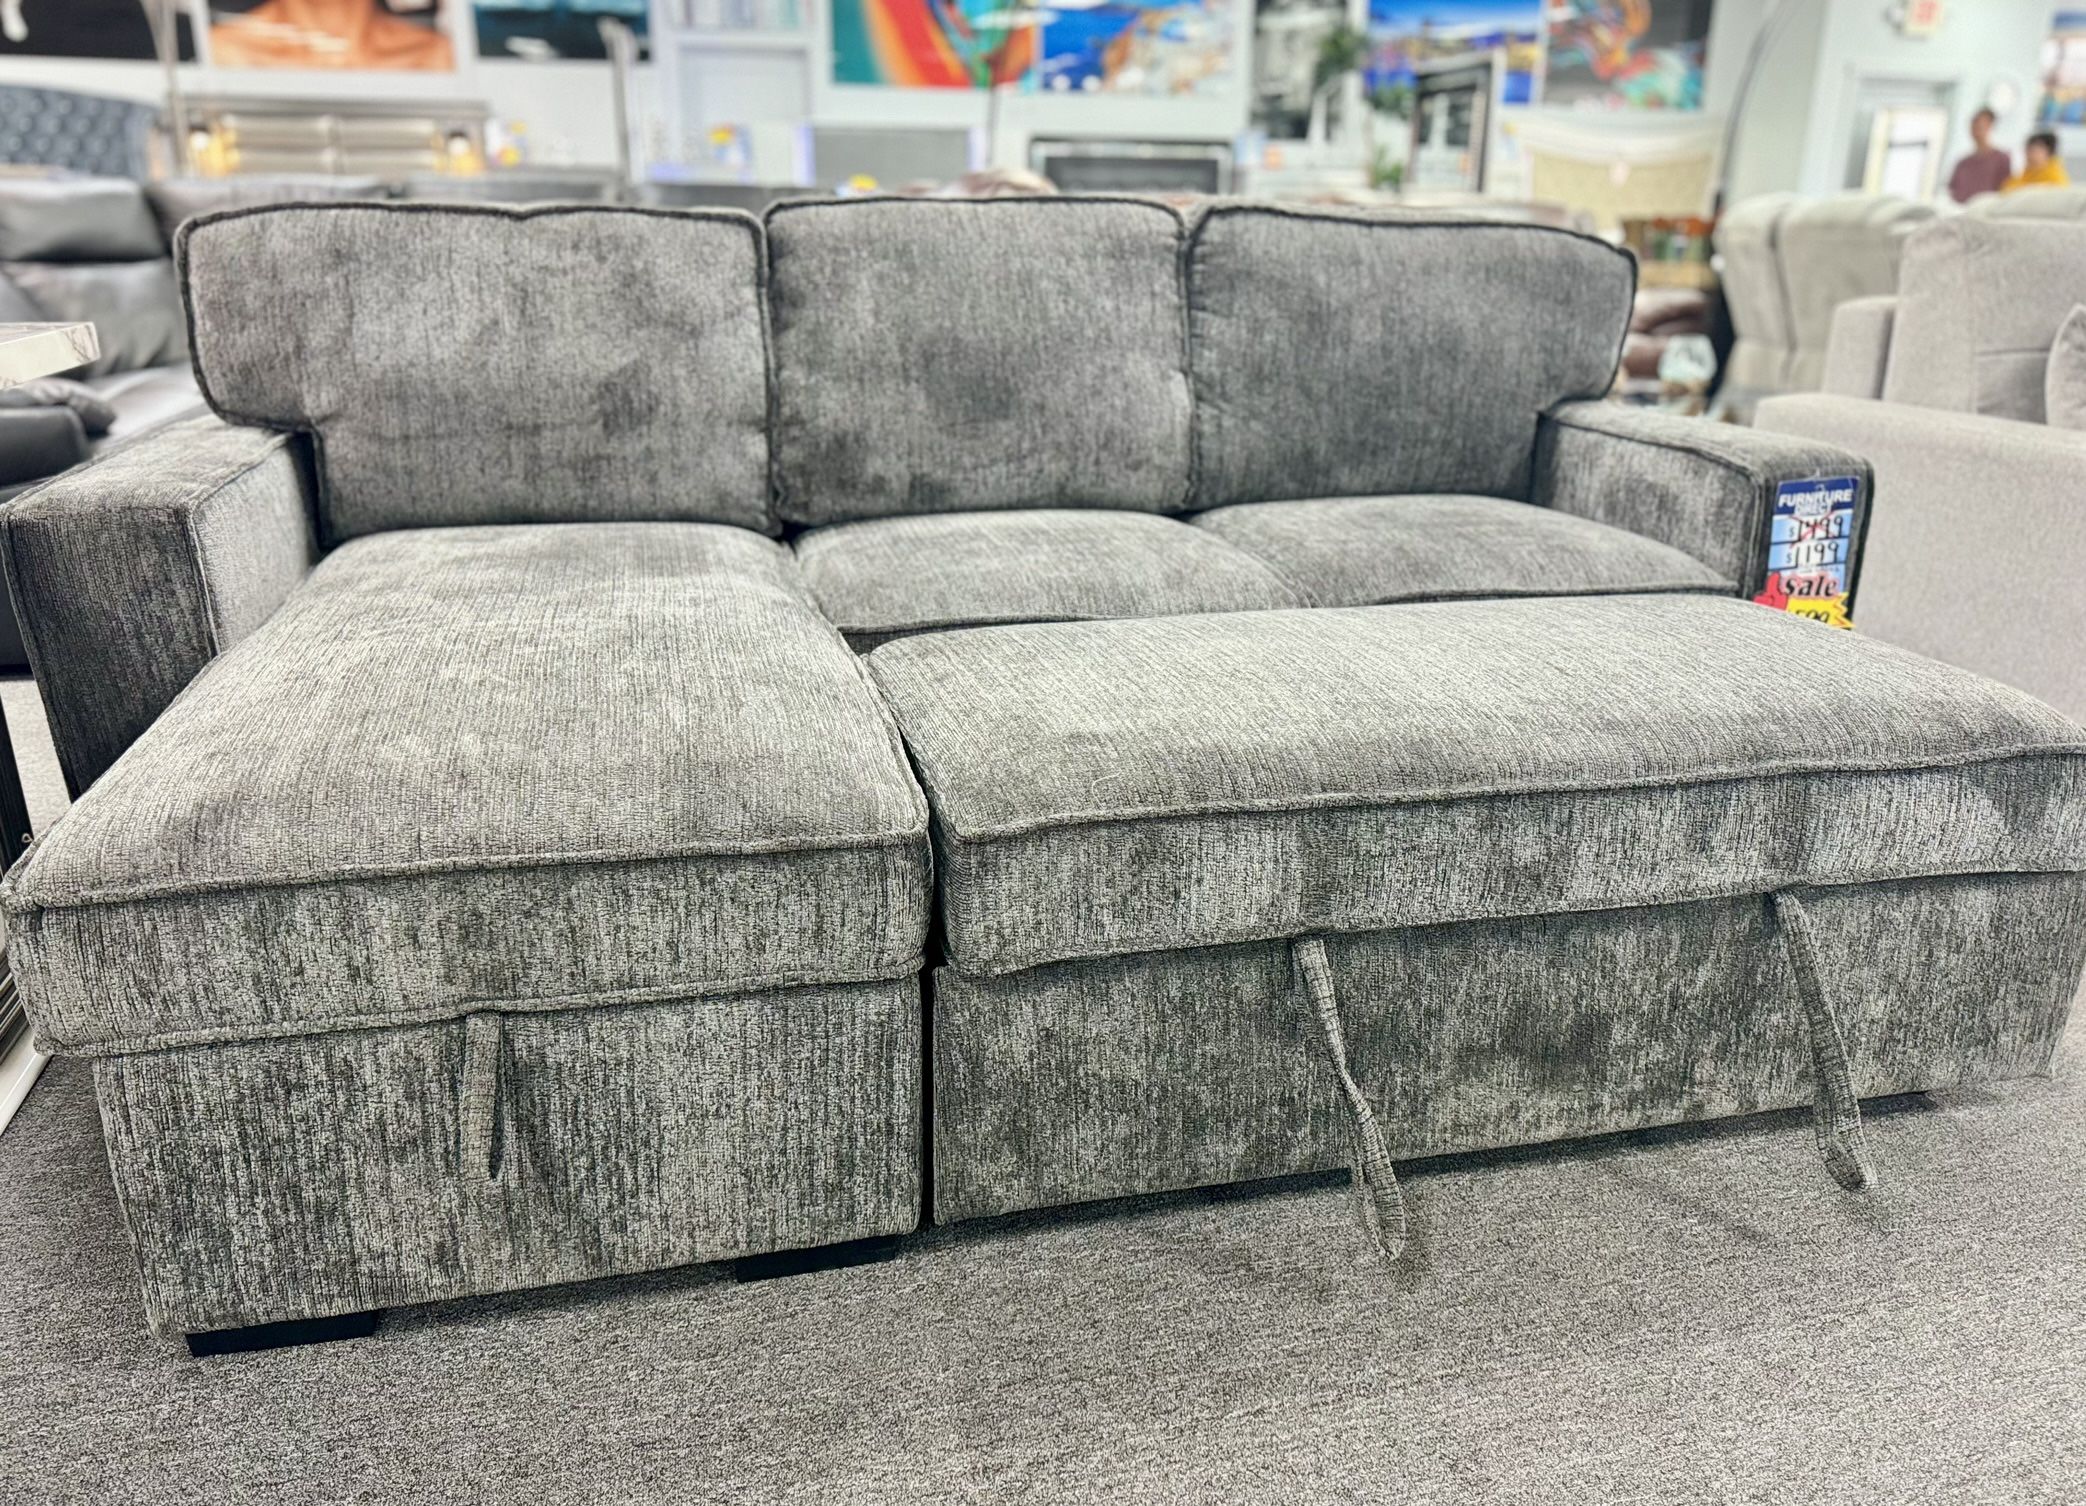 Overstock Sale Must Go🚨Beautiful Grey Pull Out Sleeper Sectional Furniture Amazing Deal $599 Overstock Sale Must Go🚨Beautiful Grey Pull Out Sleeper